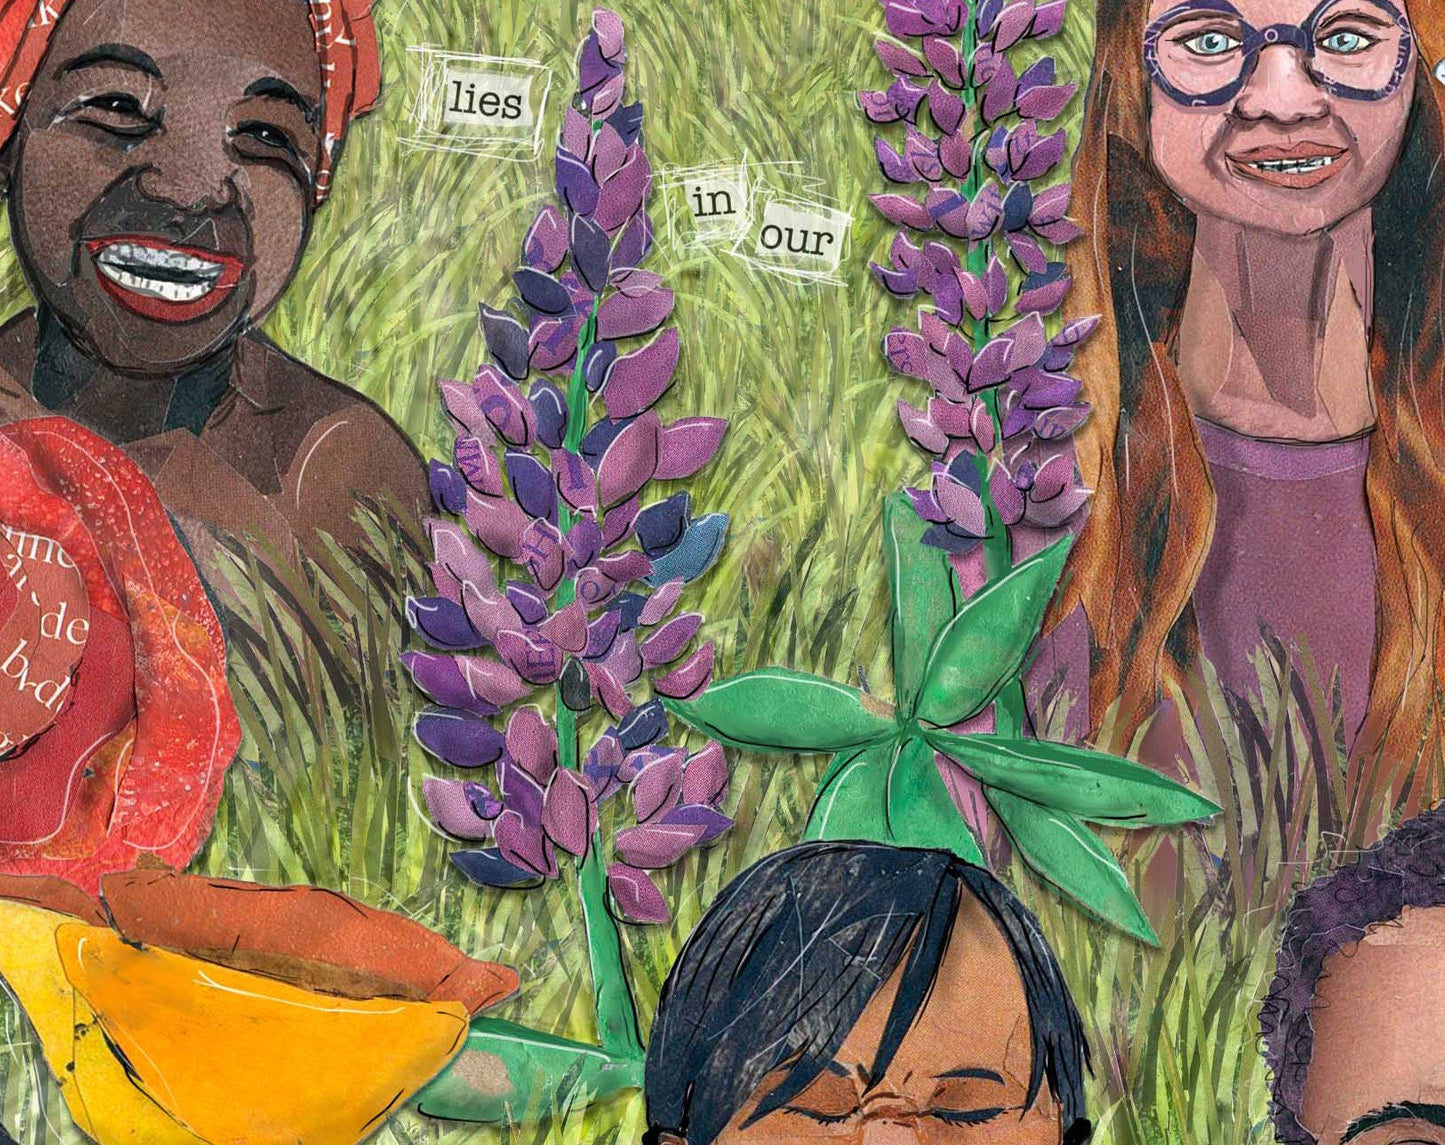 Greeting Card of mixed media collage of a diversity of children's faces in a field of flowers, inspirational quote - Blank Inside